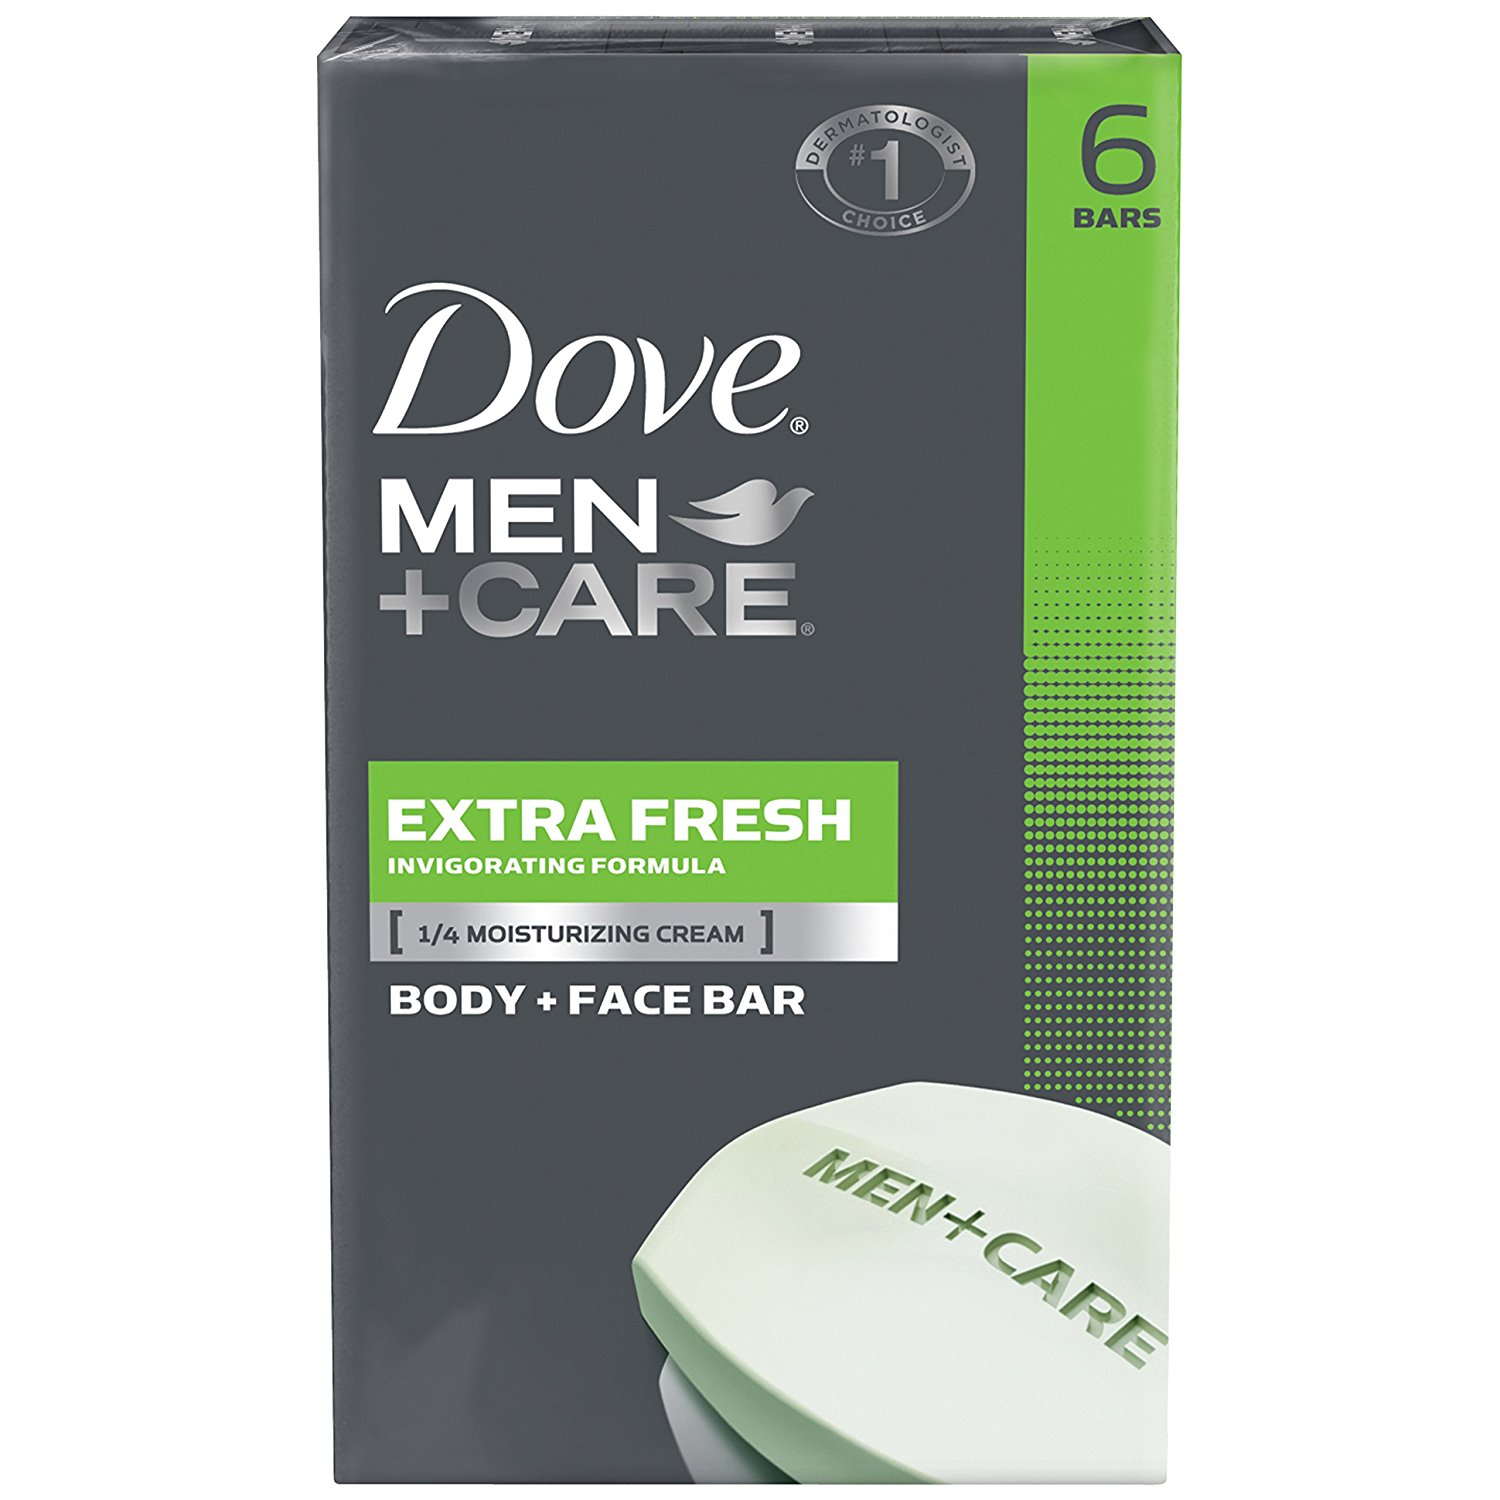 Dove Men+Care Body and Face Bar 6 Bars Only $4.55 Shipped!